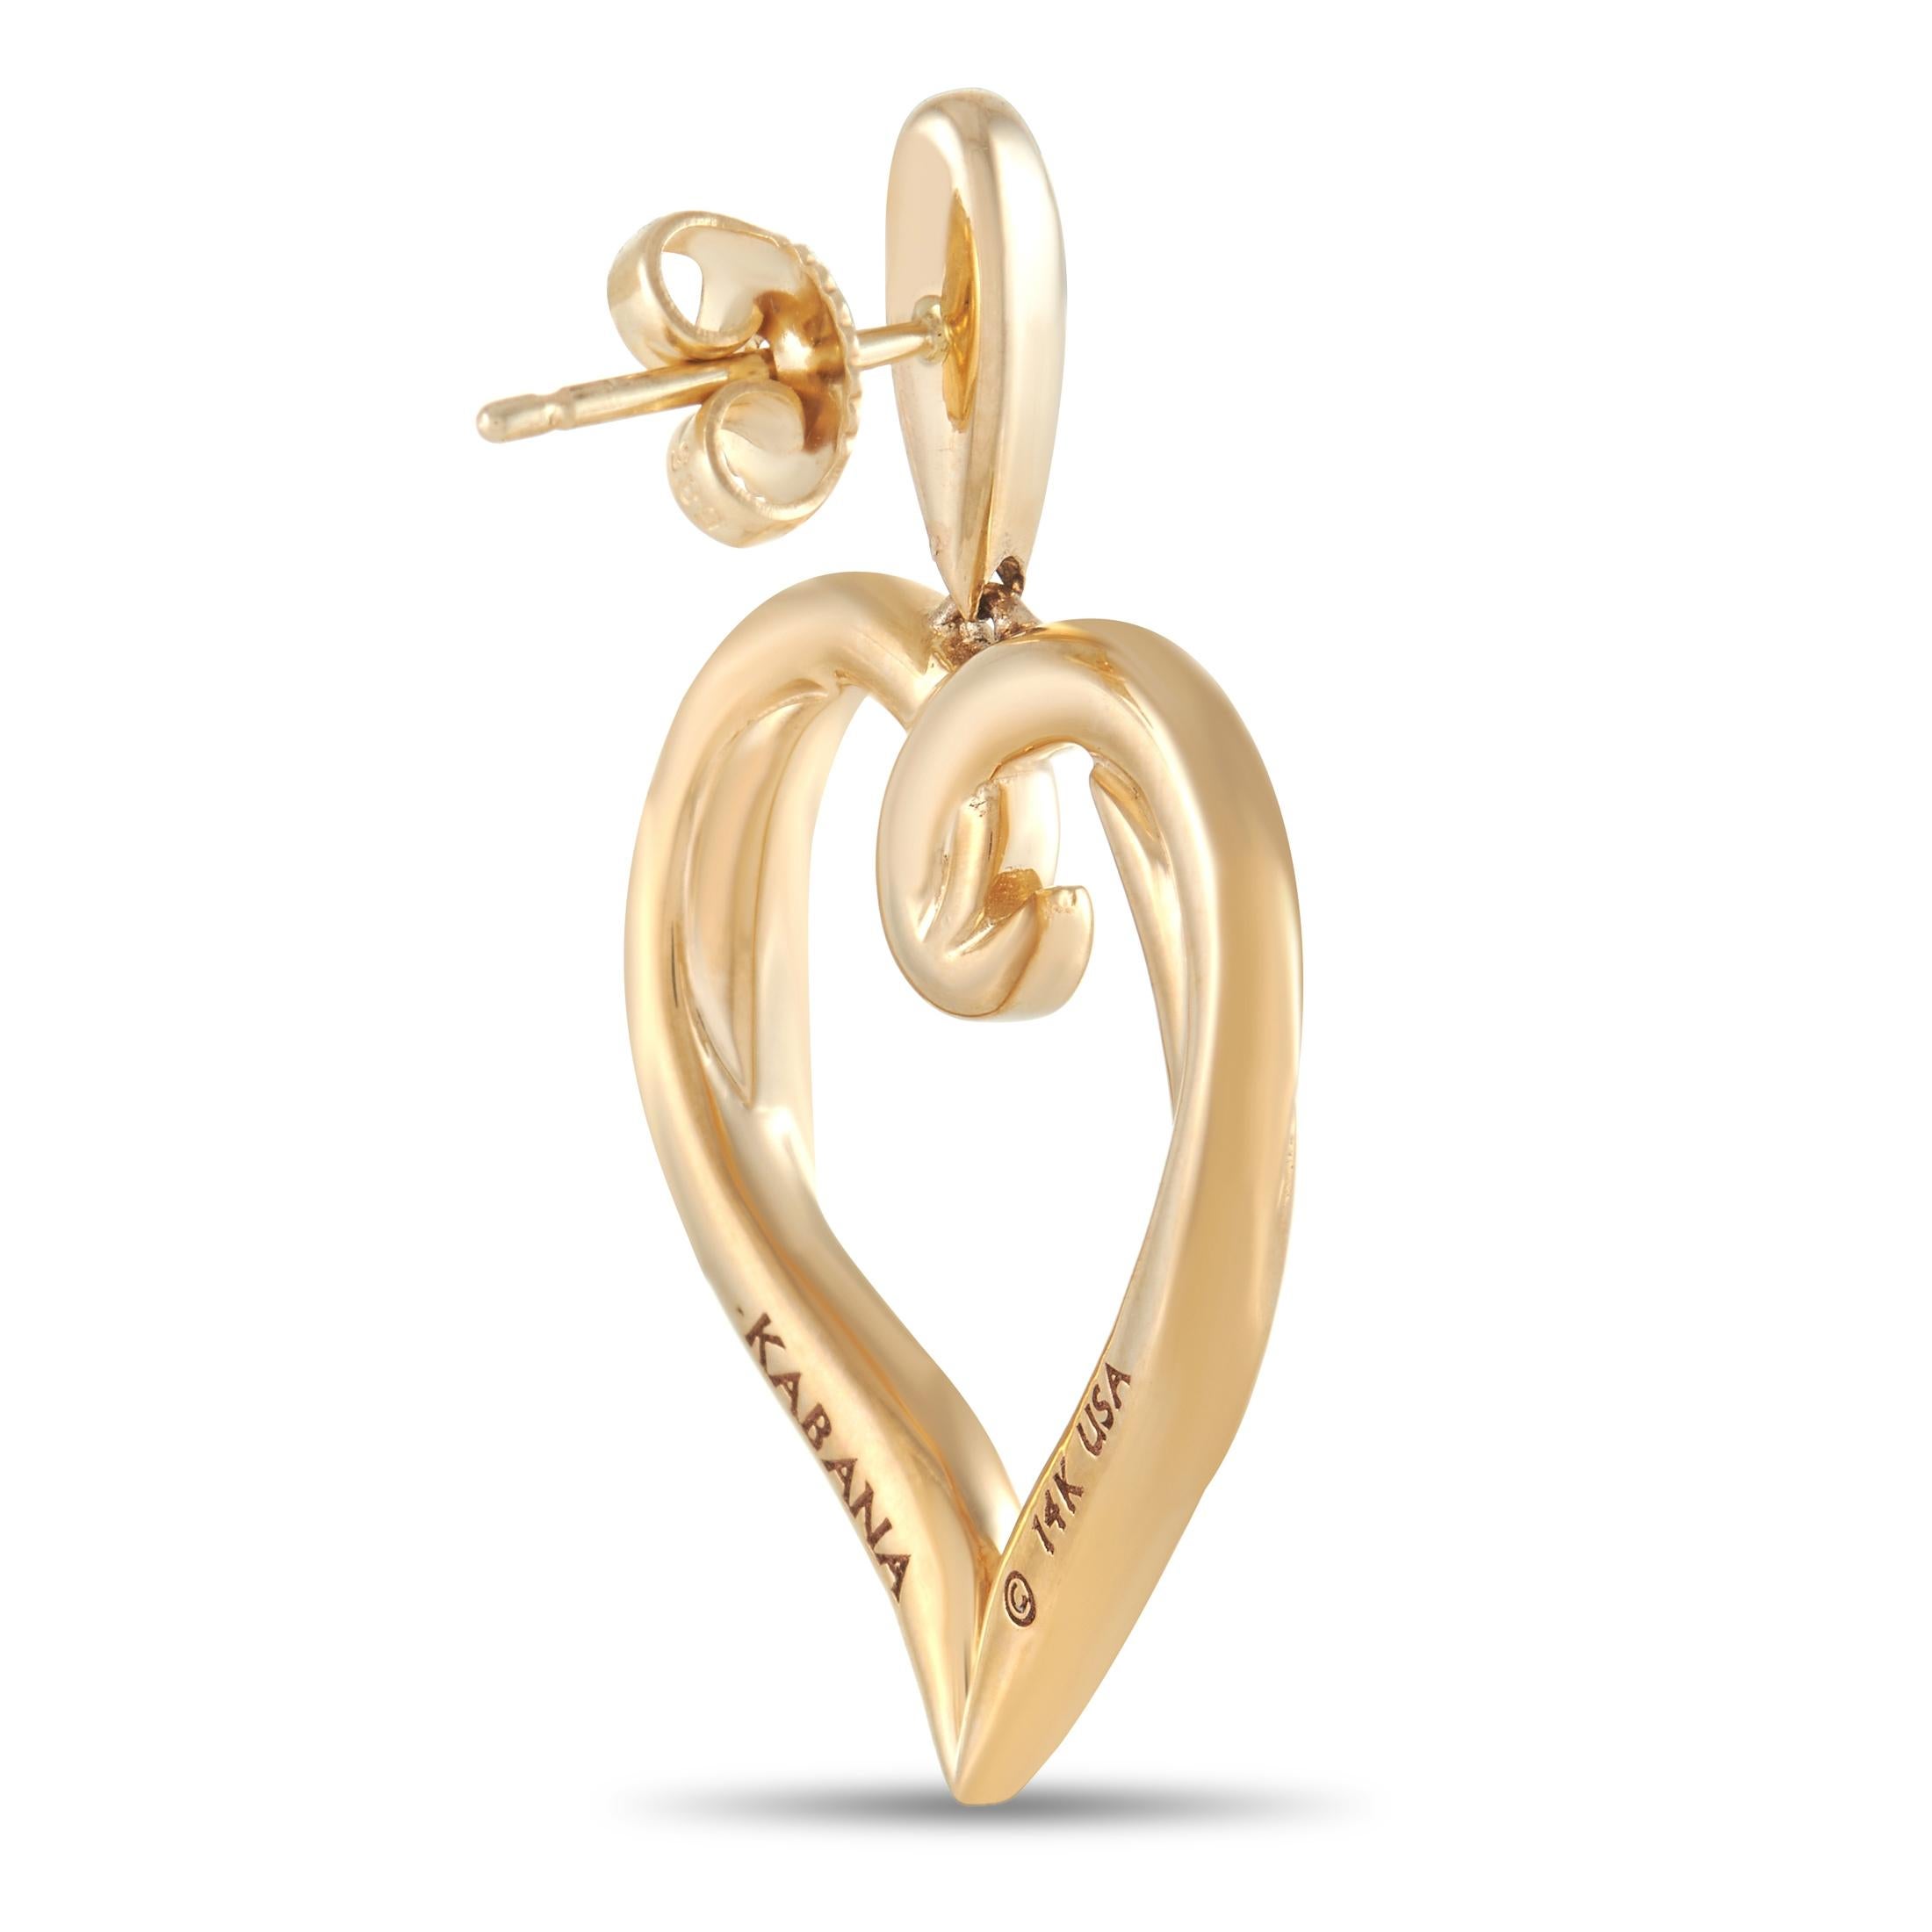 These unique Kabana 14K Yellow Gold Mother of Pearl Spiny Heart Earrings are made with 14K yellow gold in an openwork heart shape. Each earring is inlaid with swirls of Mother of Pearl and Spiny in a range of warm colors. The earrings measure 1.38